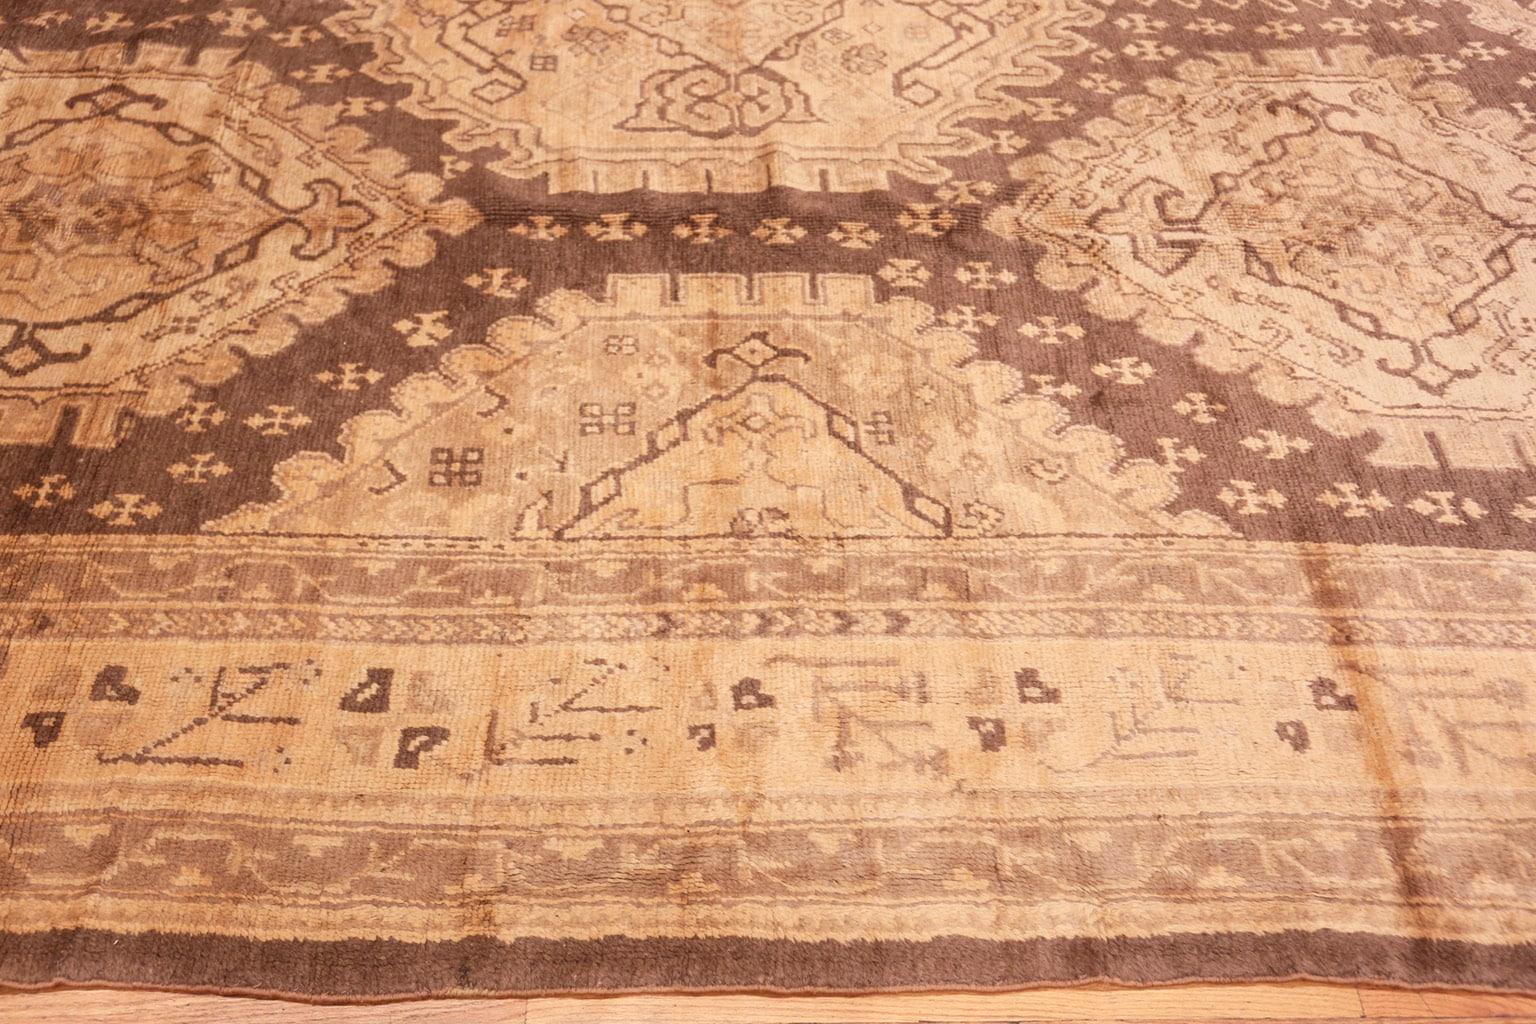 Large Size Decorative Antique Turkish Oushak Rug, Country of Origin: Turkey, Circa Date: Early 20th Century - Size: 10 ft 9 in x 14 ft (3.28 m x 4.27 m).